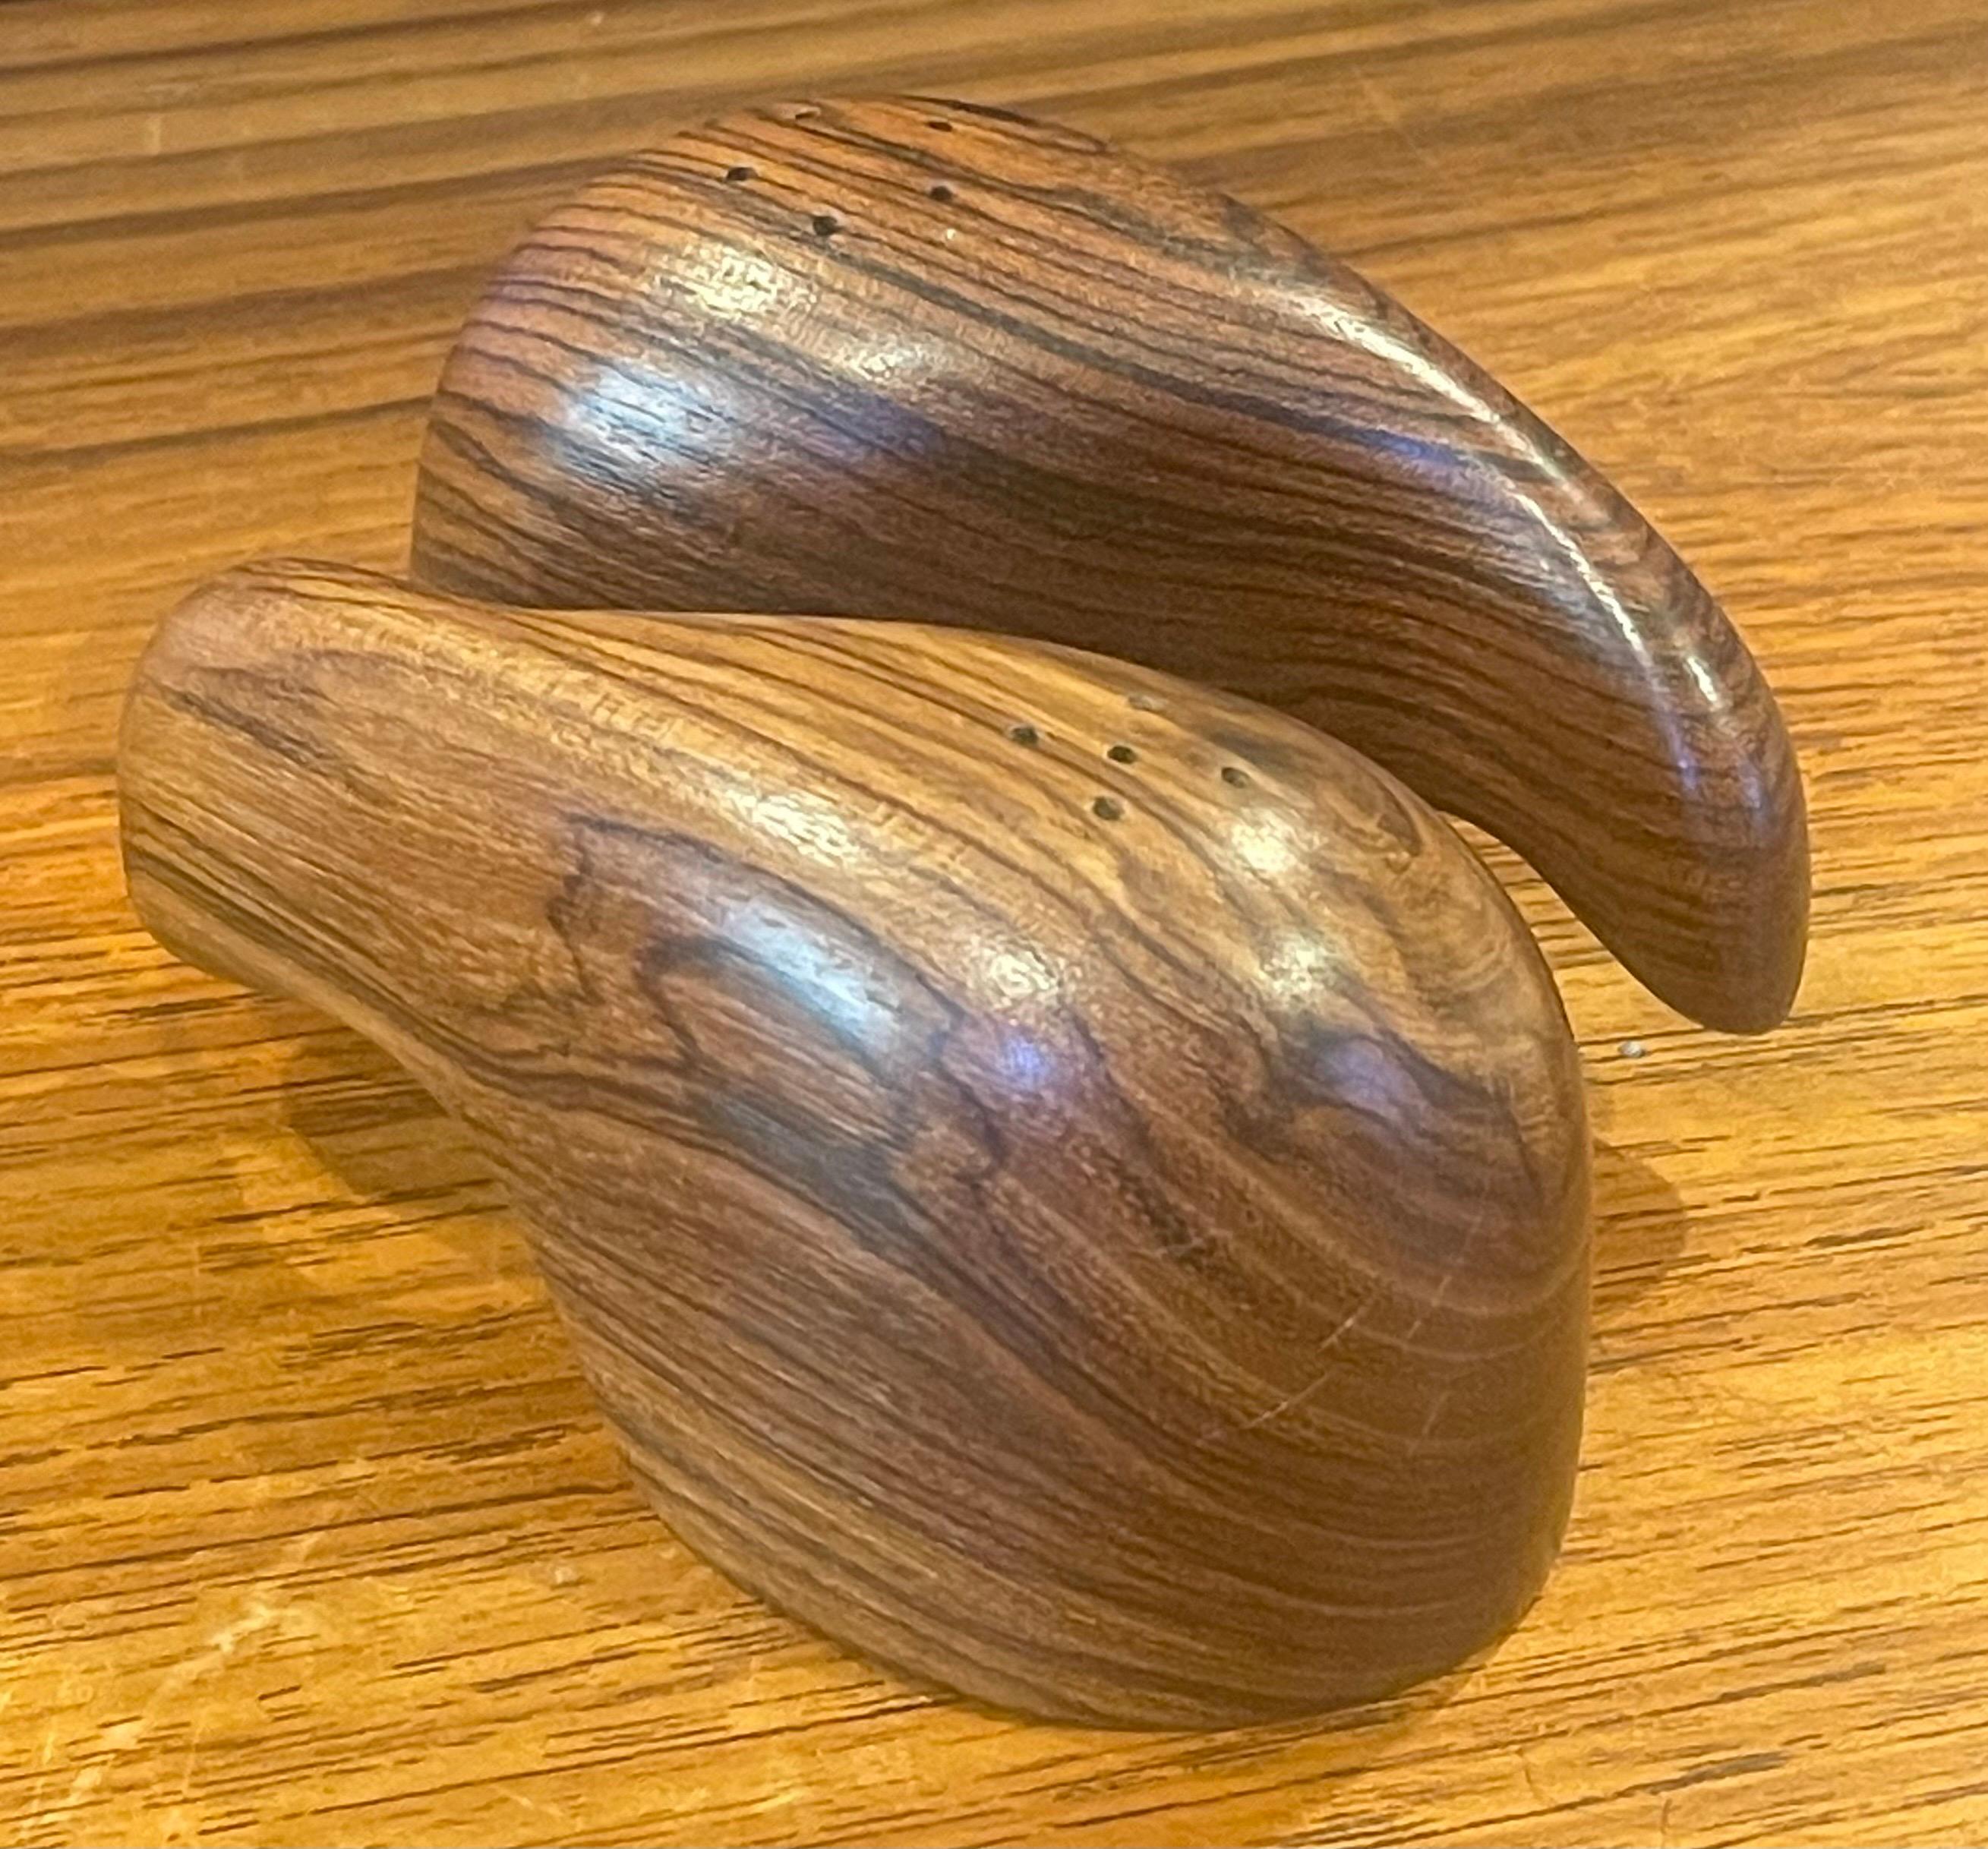 Pair of MCM Cocobolo Wood Minimalist Salt & Pepper Shakers by Don Shoemaker For Sale 5